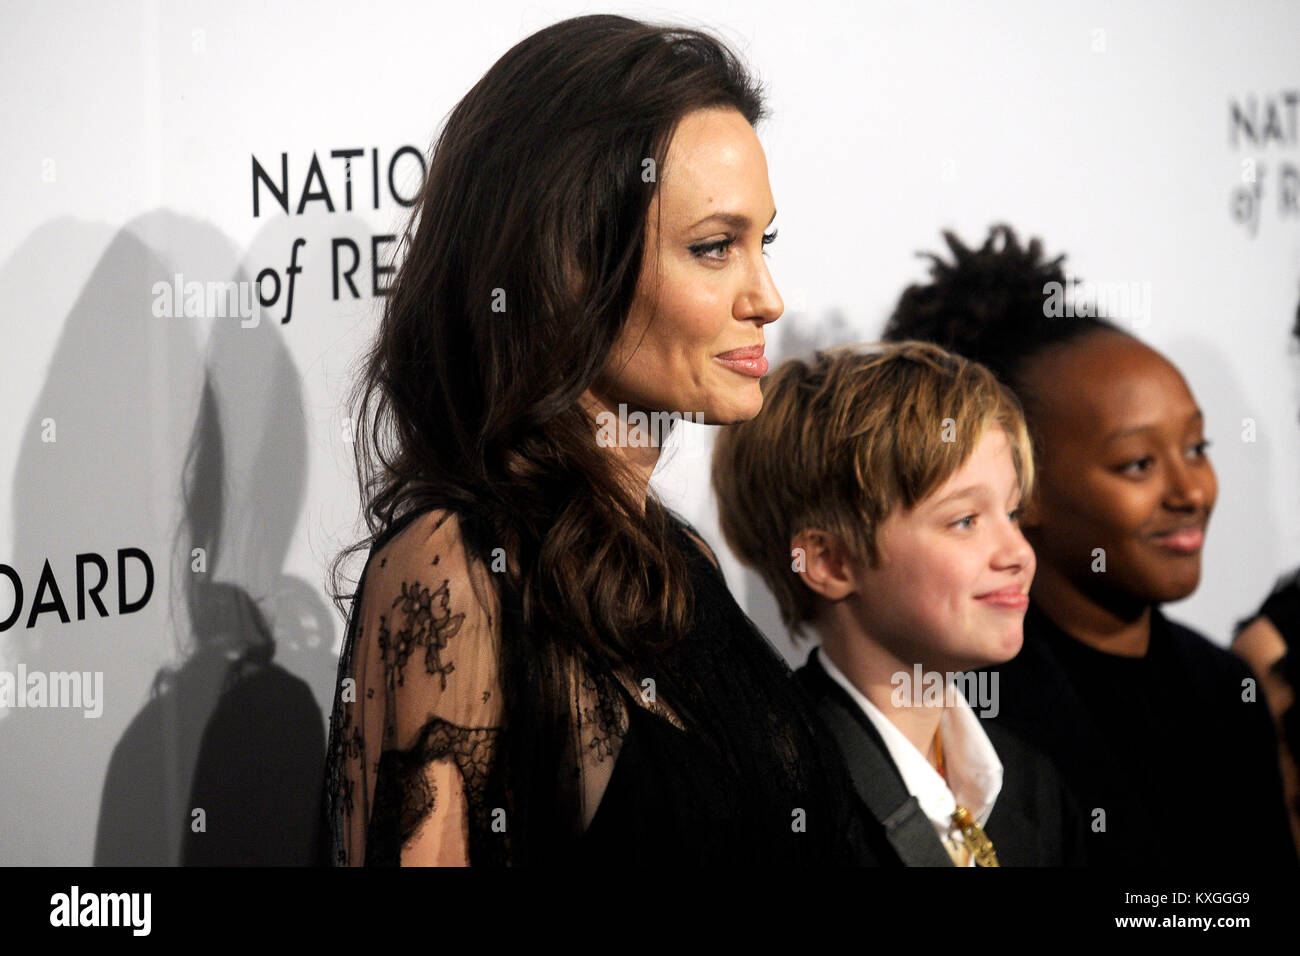 New York, USA. 09th Jan, 2018. Angelina Jolie and her daughters Shiloh Jolie-Pitt and Zahara Jolie-Pitt attend the National Board of Review Annual Awards Gala at Cipriani 42nd Street on January 9, 2018 in New York City. Credit: Geisler-Fotopress/Alamy Live News Stock Photo